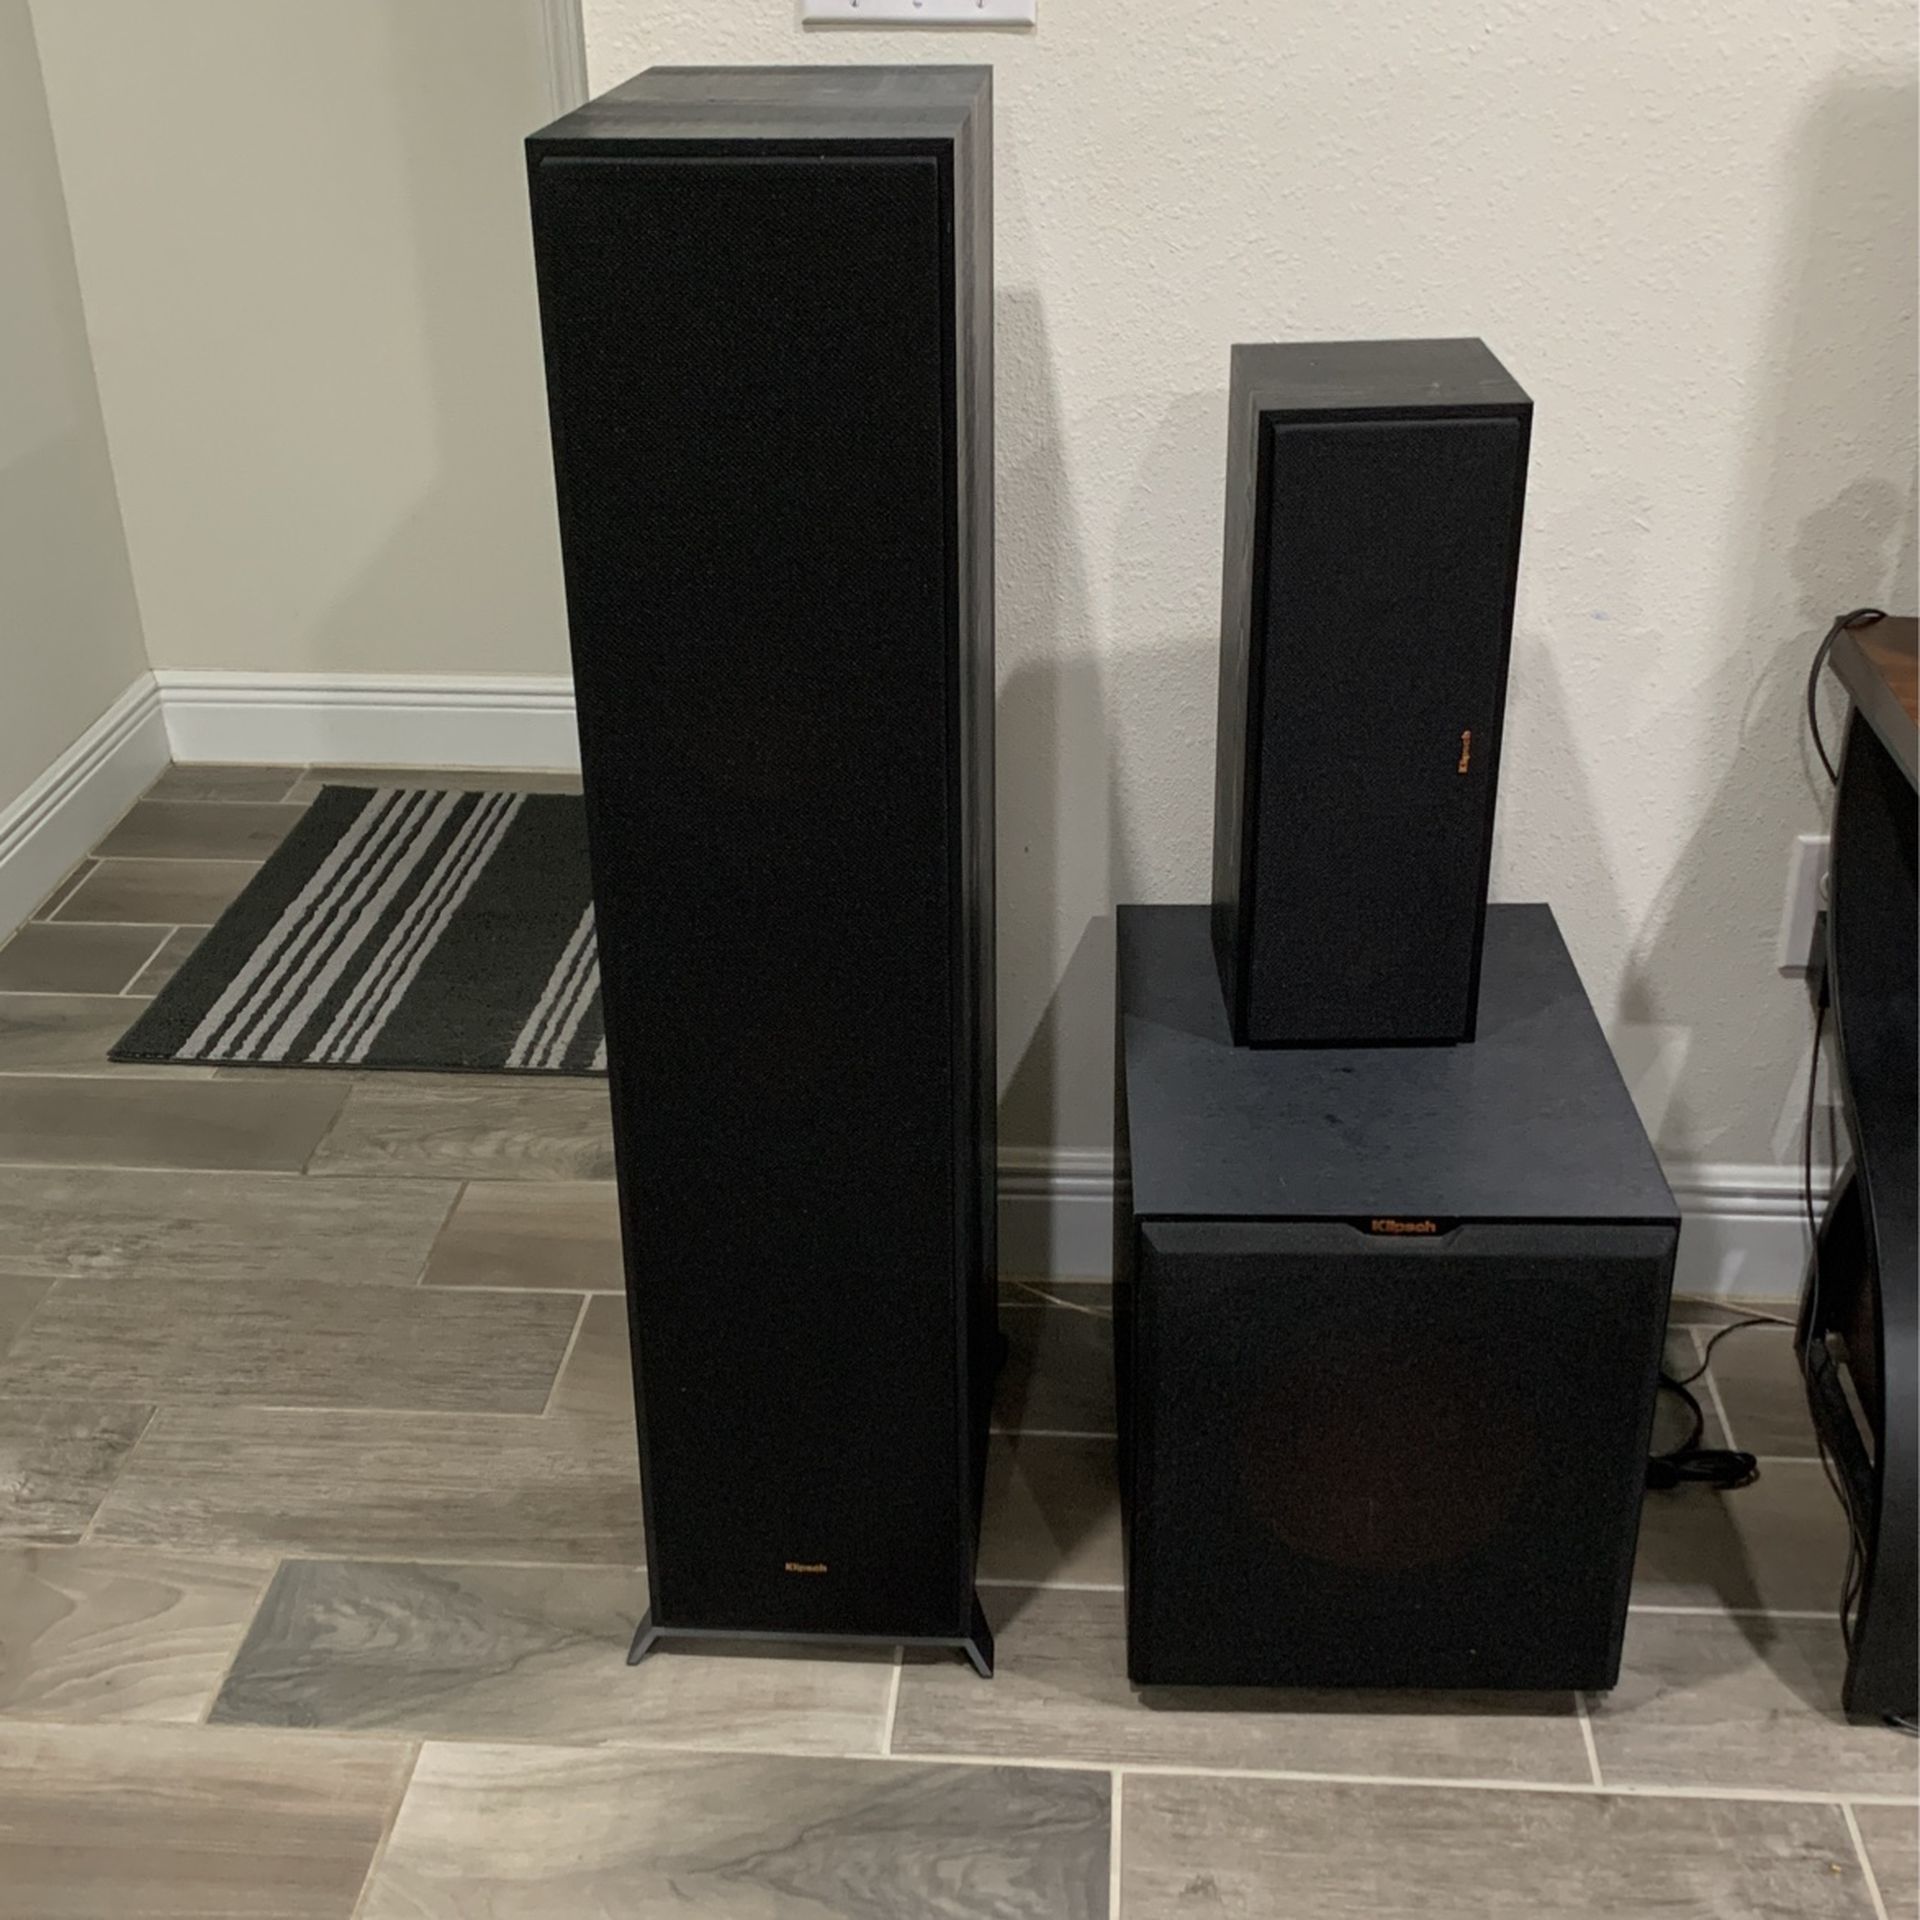 Klipsch Speakers And Yamaha Receiver